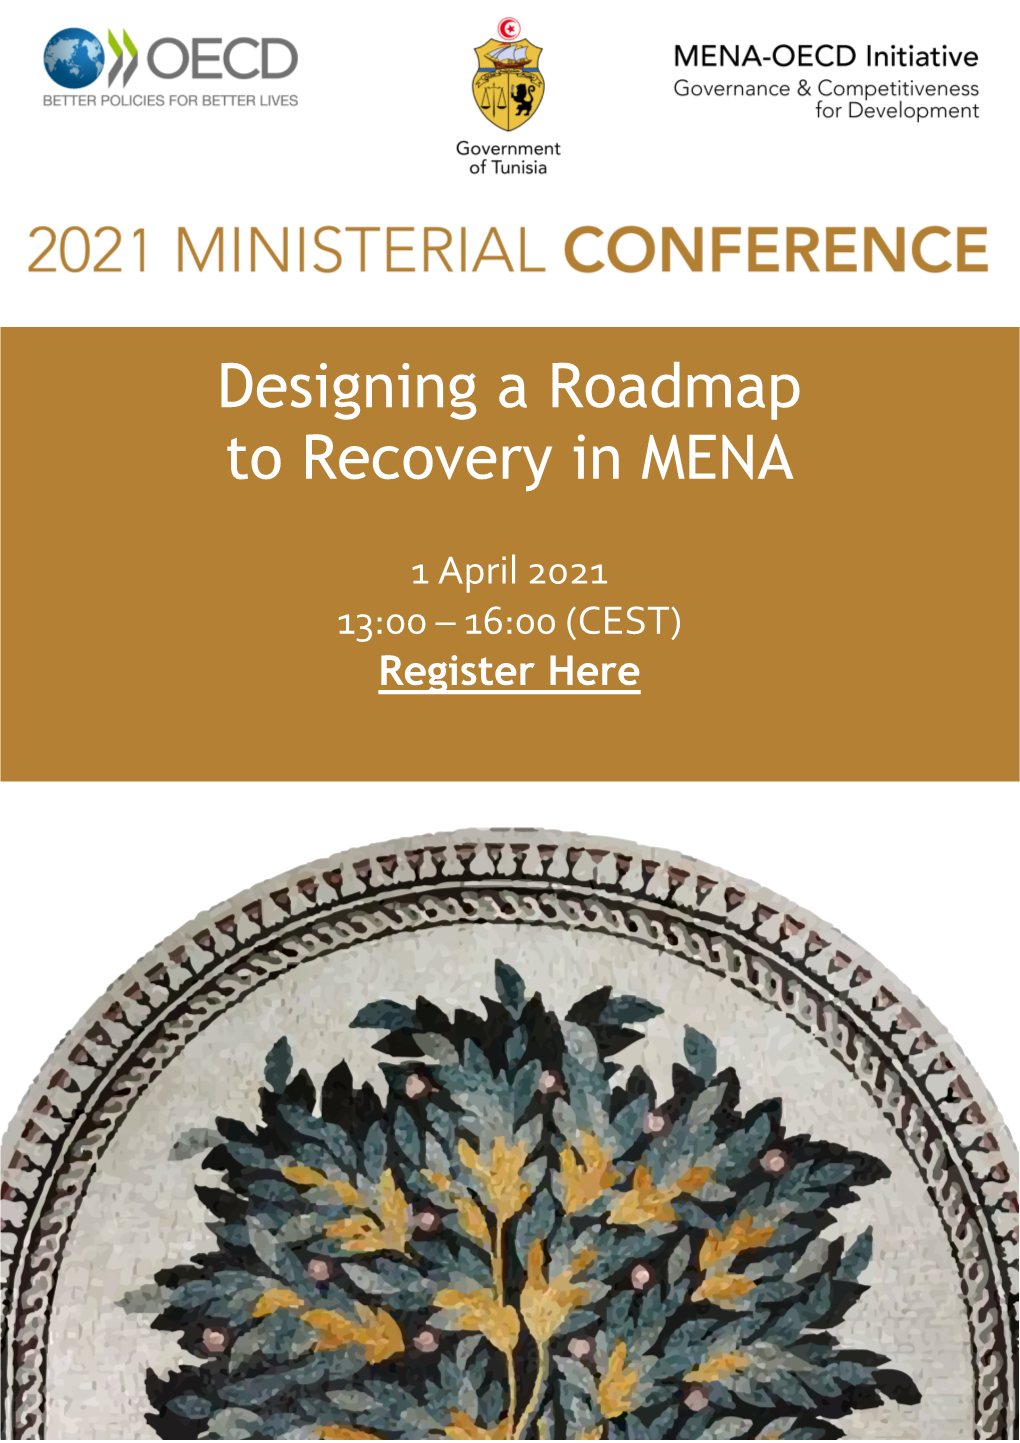 Designing a Roadmap to Recovery in MENA